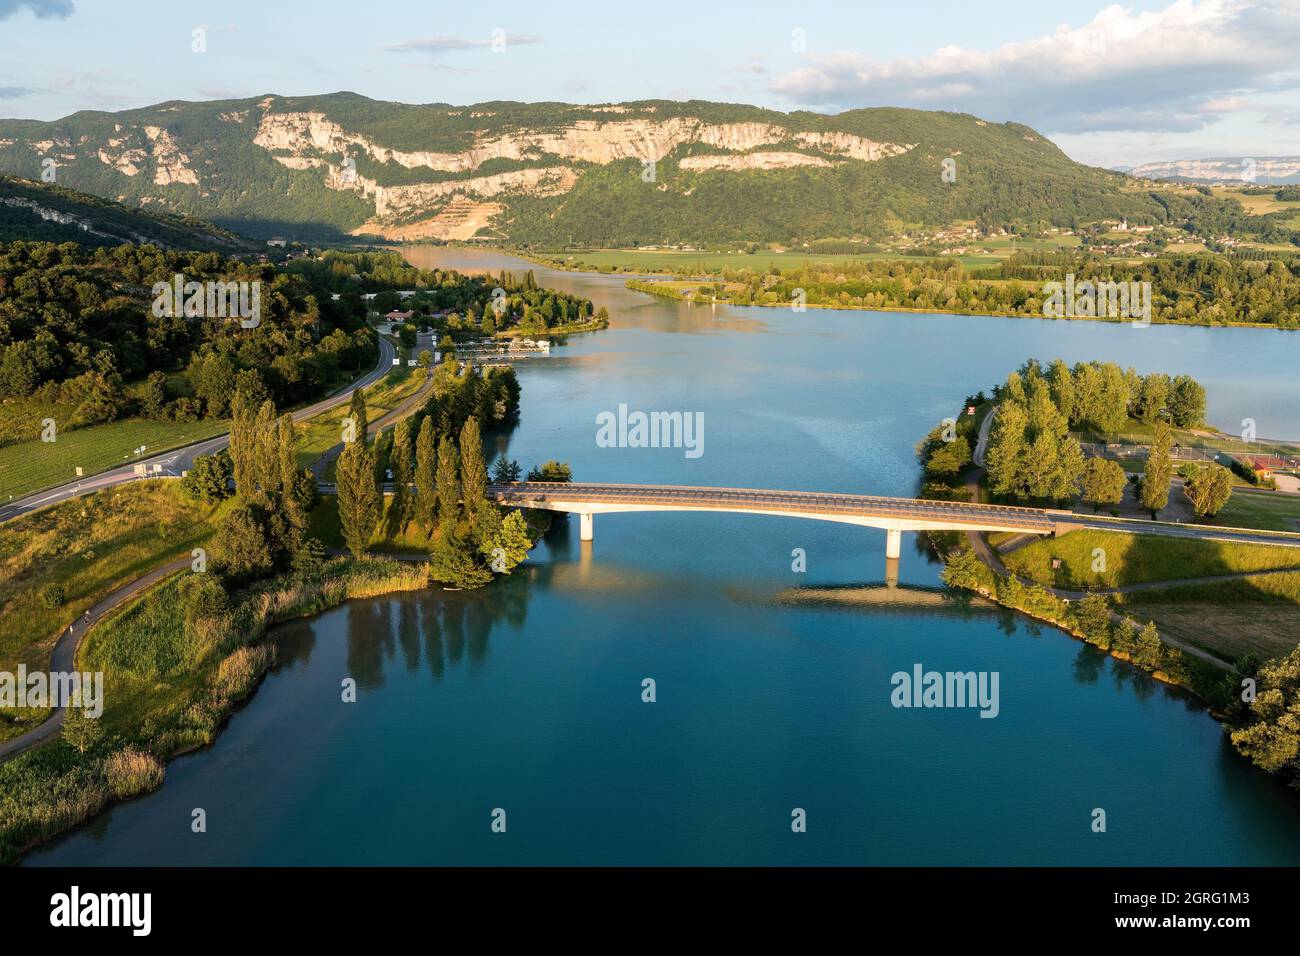 France, Ain, Murs et Gelignieux, road bridge and Cuchet lake on the Rhone river, Mont Tournier in the background (aerial view) Stock Photo